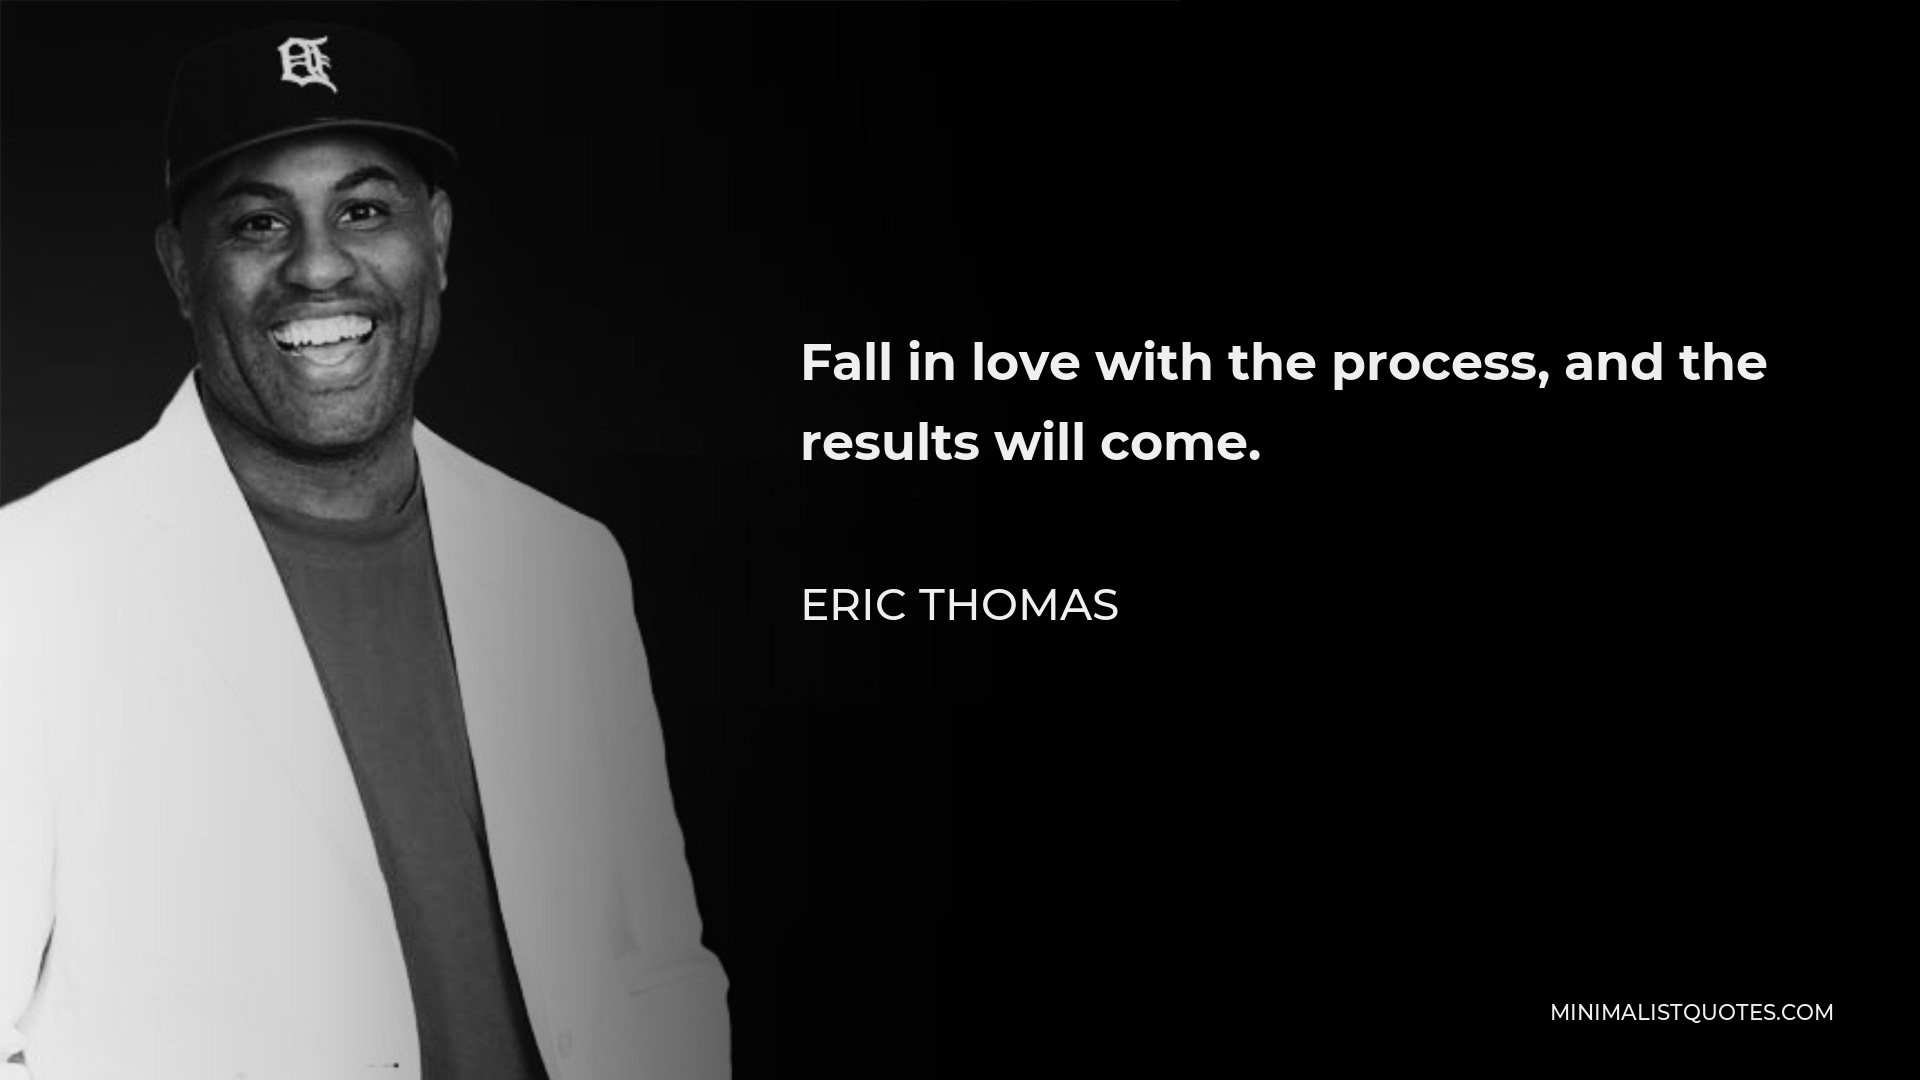 Eric Thomas Quote - Fall in love with the process, and the results will come.